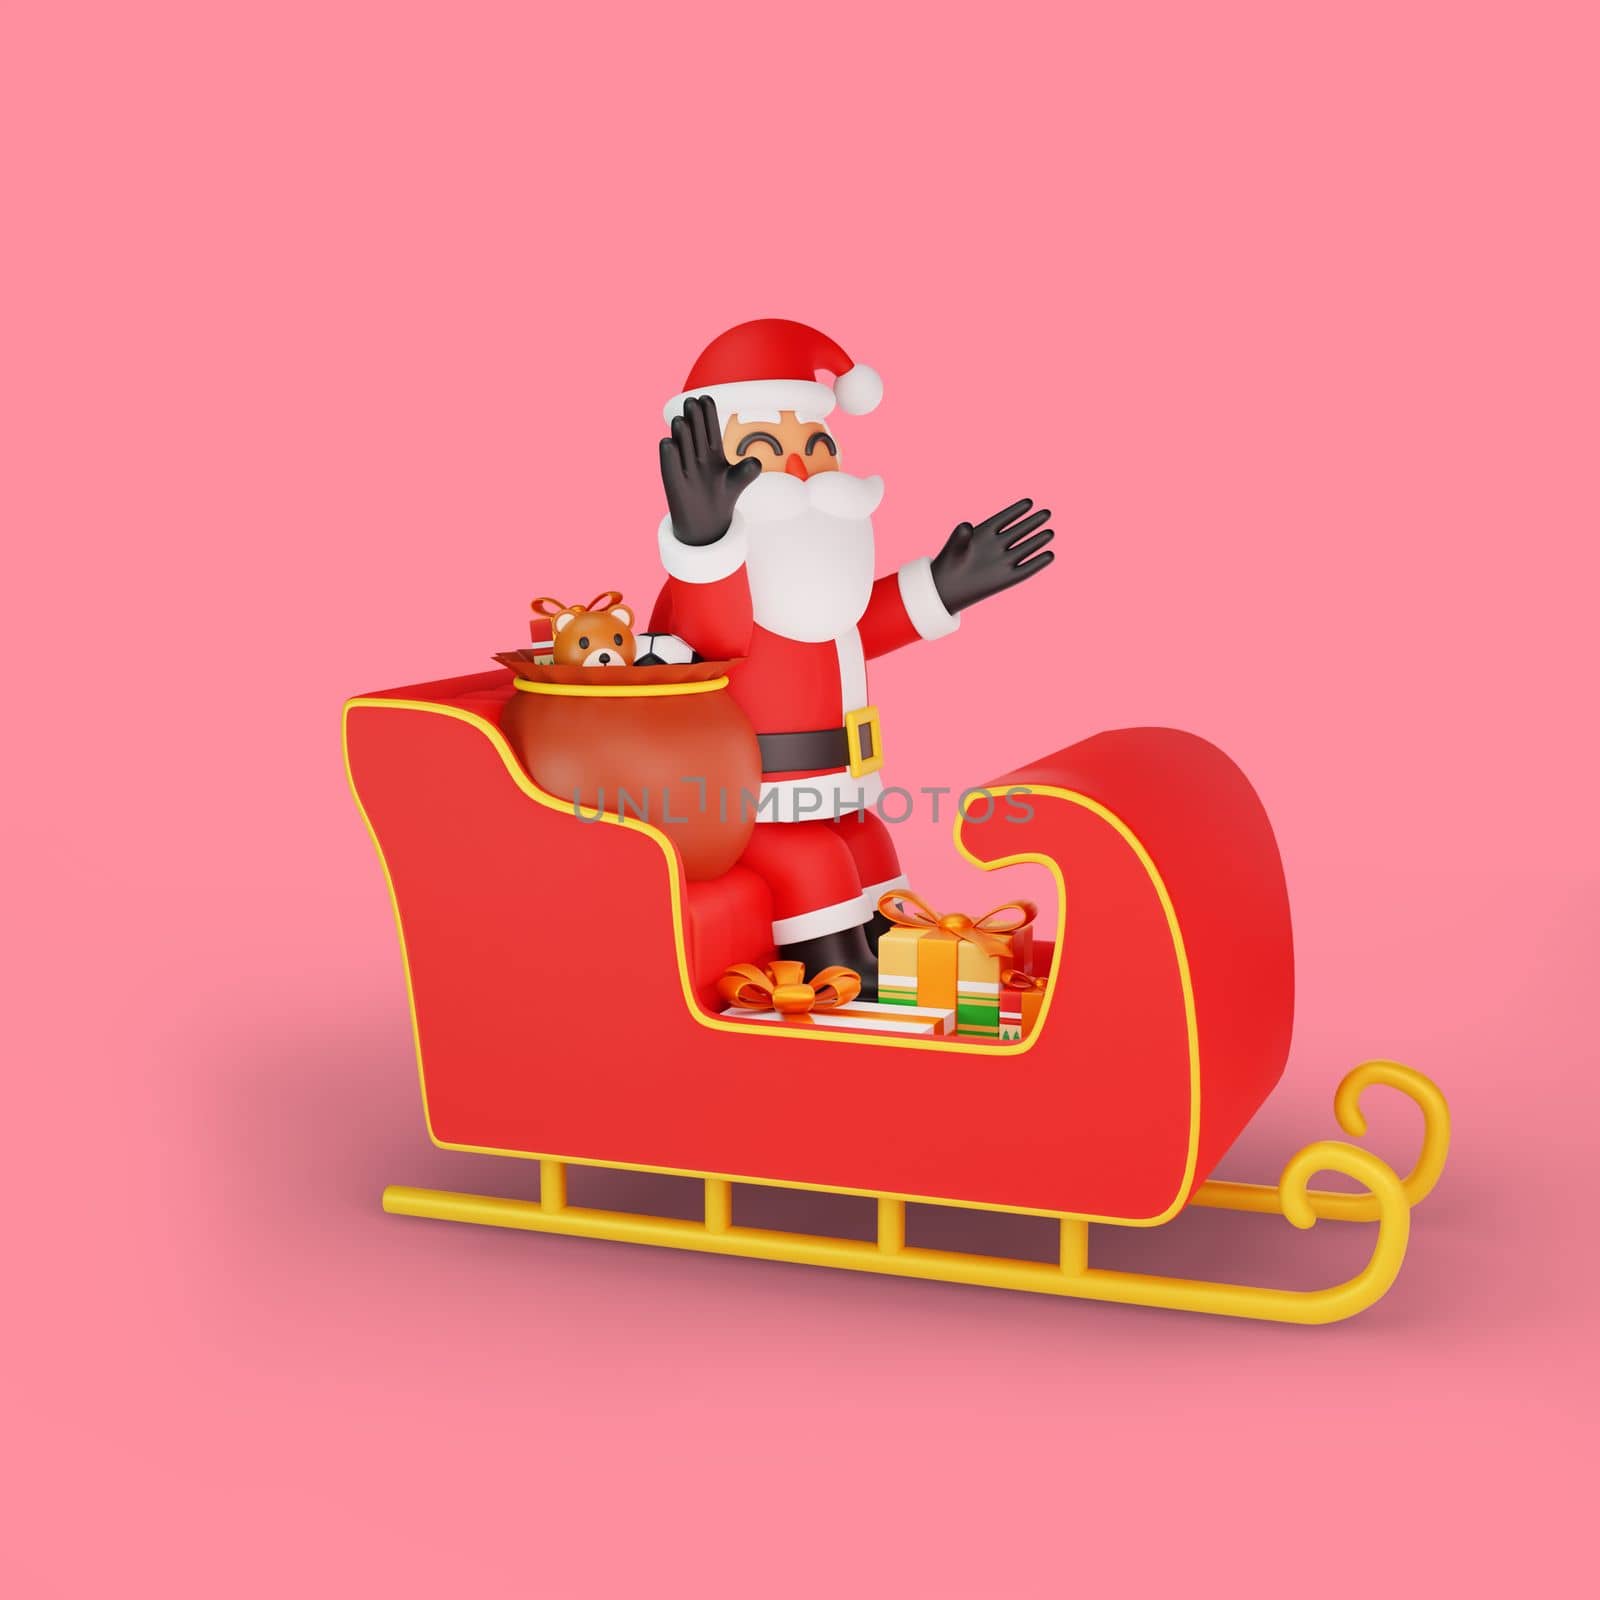 3d rendering of santa pose in front of a sleigh filled with gifts